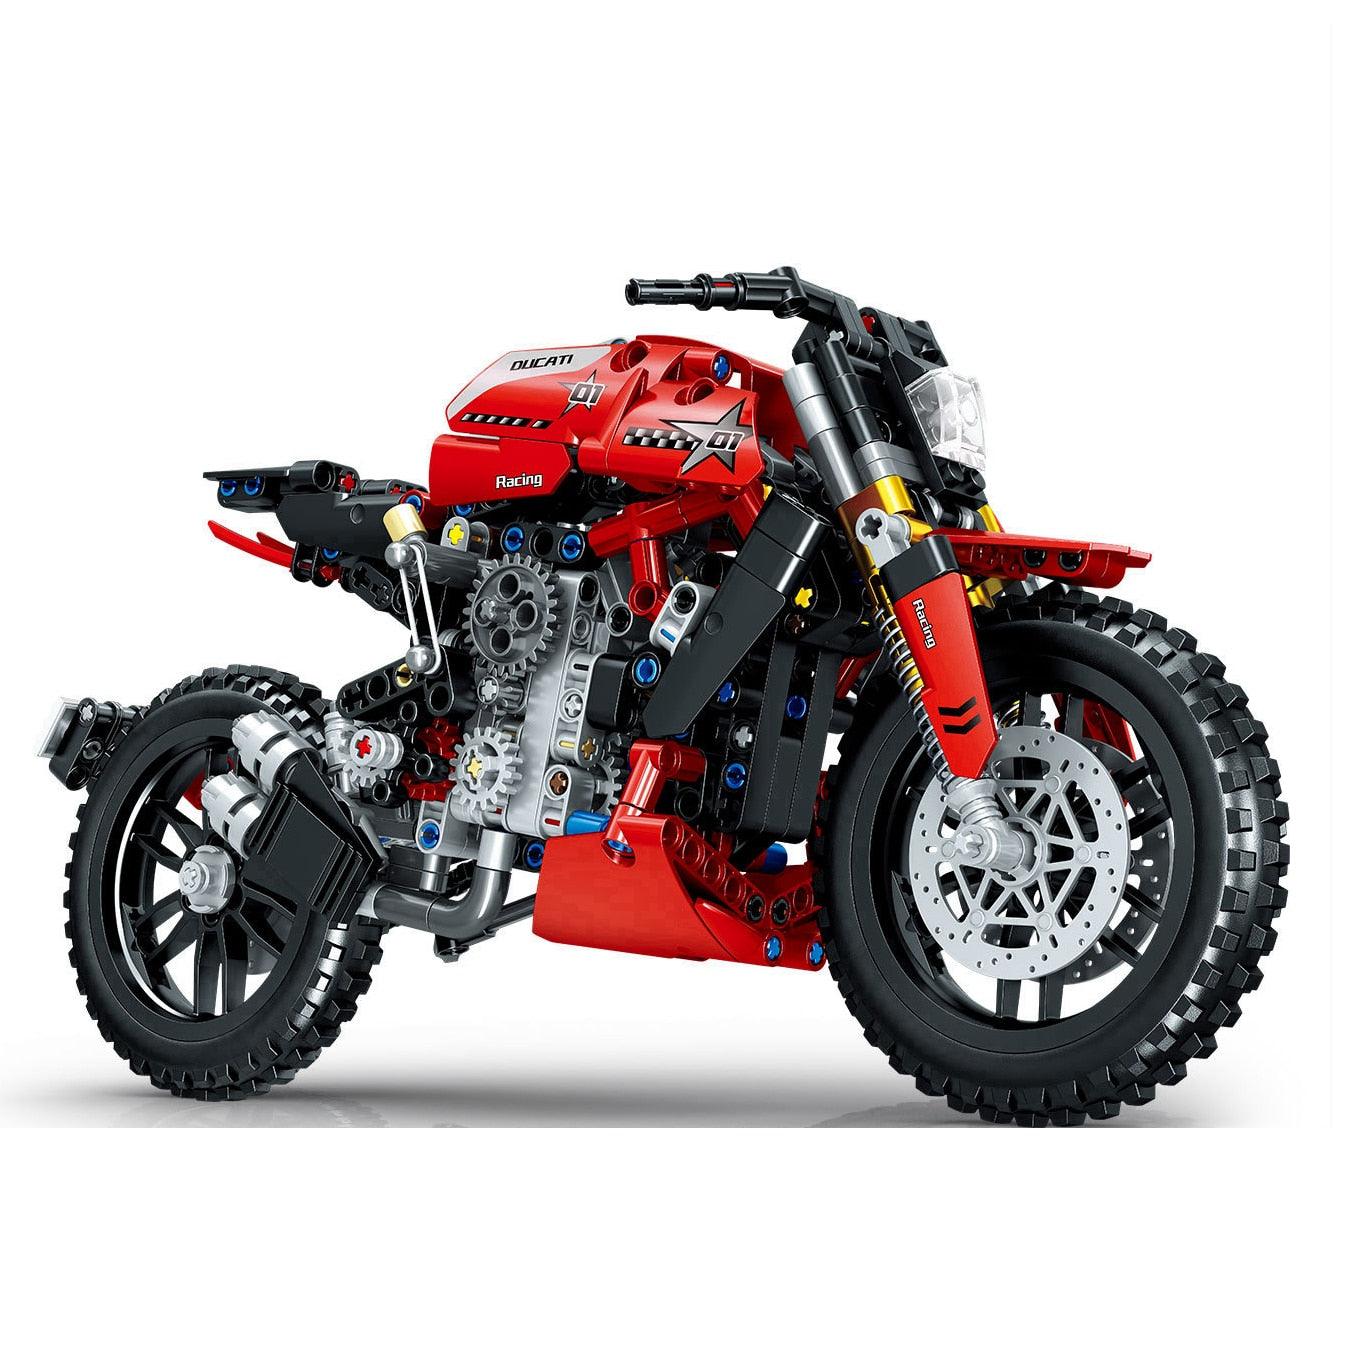 Ducati Monster Custom s set, compatible with Lego